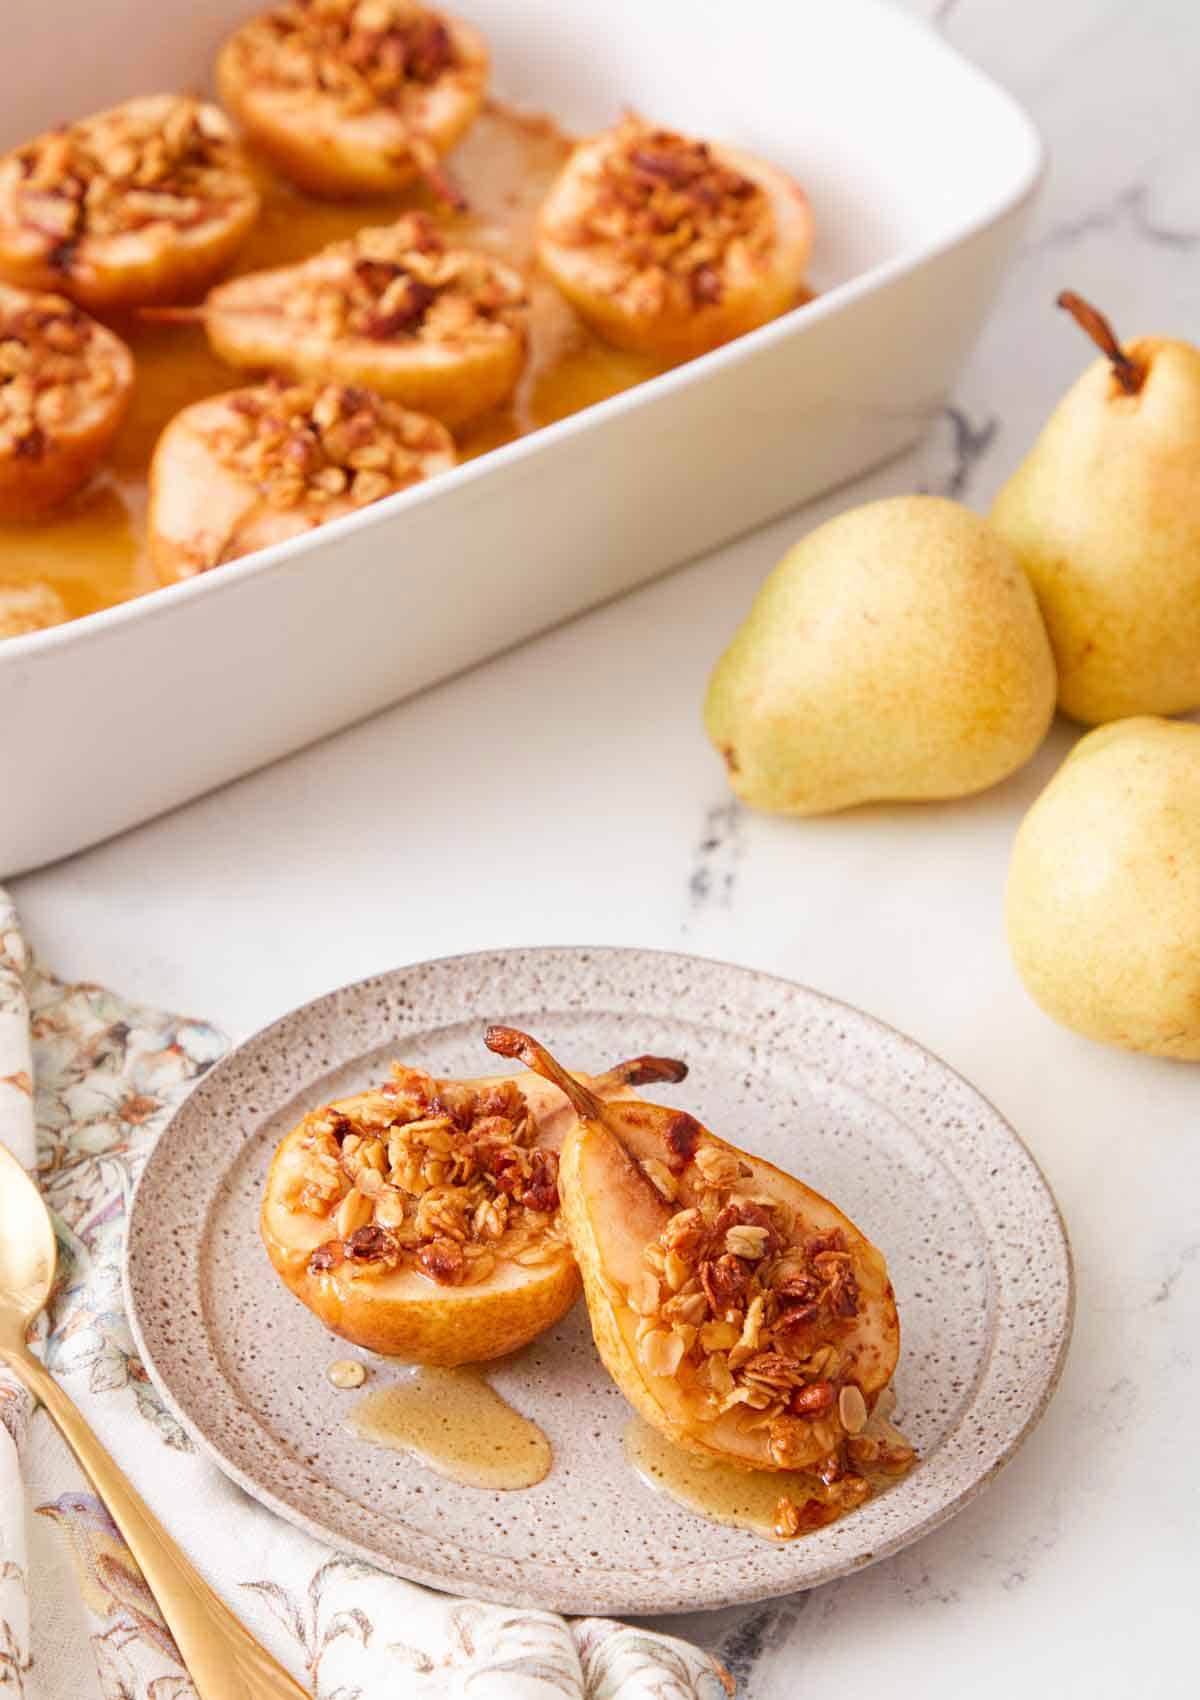 A plate with two baked pears with a baking dish with more in the background and some fresh pears on the side.